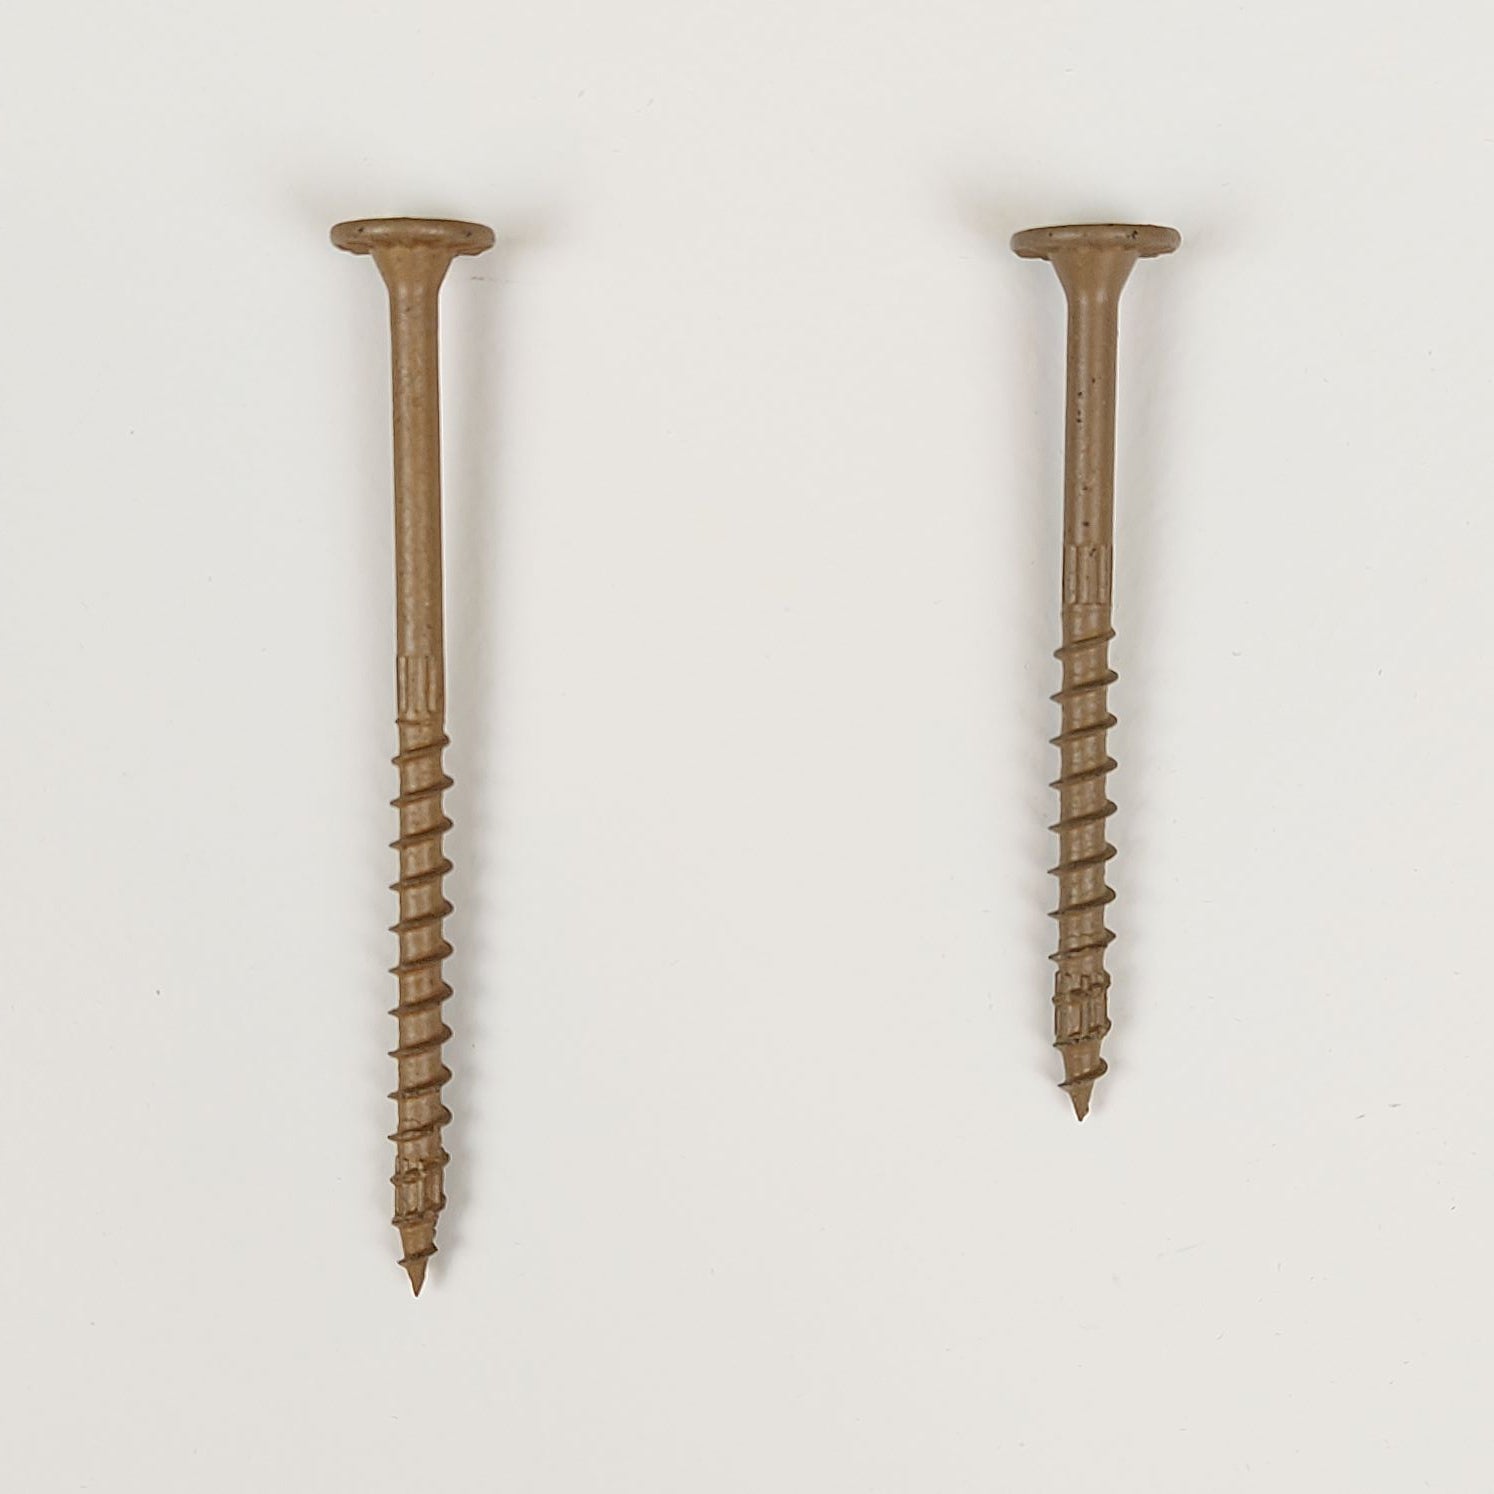 SDWS simpson timber screw 5 inch the left and sdws 4 inch screw shown on the right